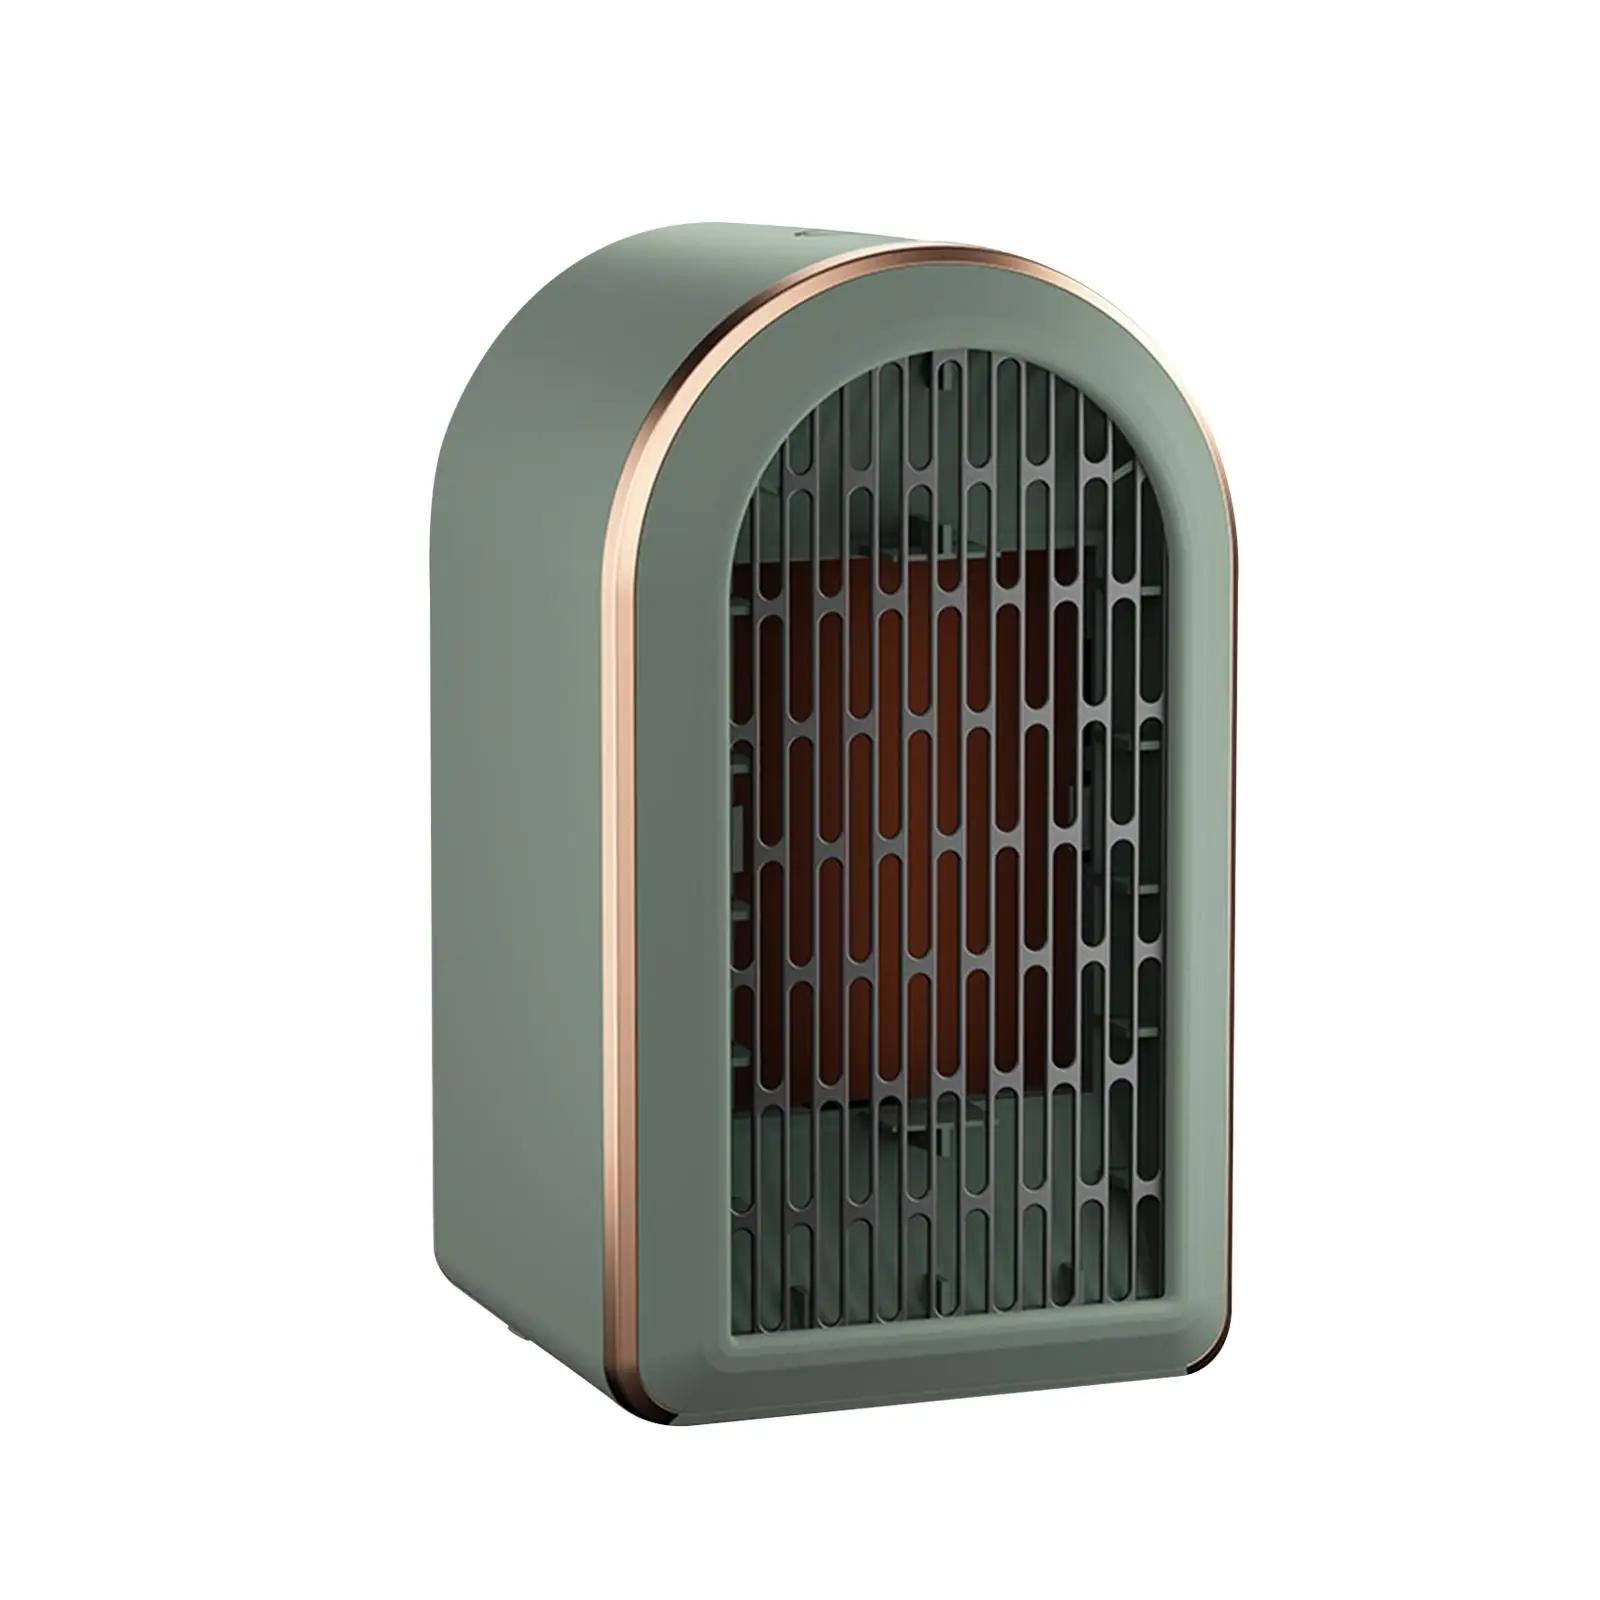 Electric Space Heater Portable Personal Heater with Thermostat Electric Space Heater for Dormitory Bedroom Desk Living Room Home